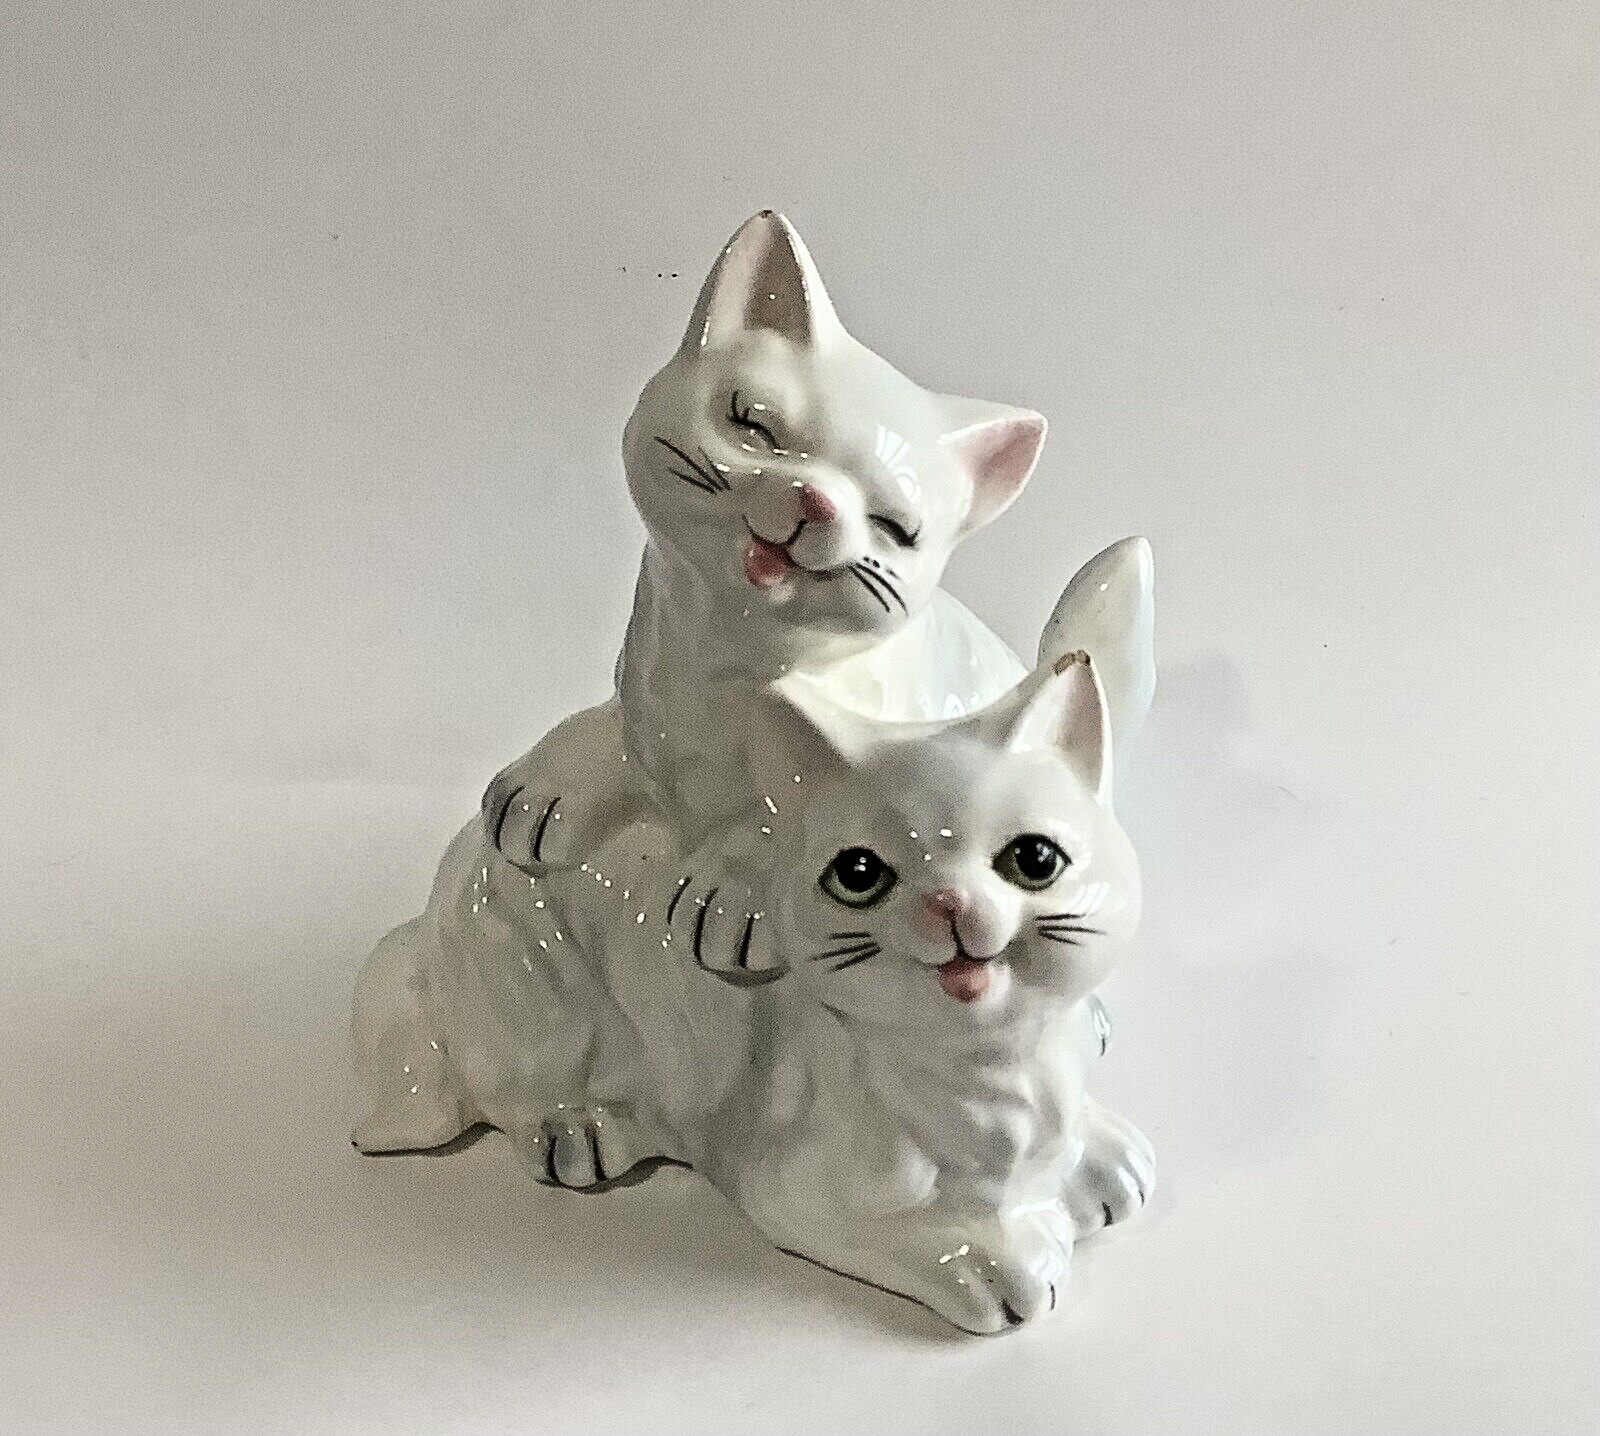 Sweet Kittens Figurine Vintage White Cats JAPAN Adorable 4 in. Hand Painted Rare